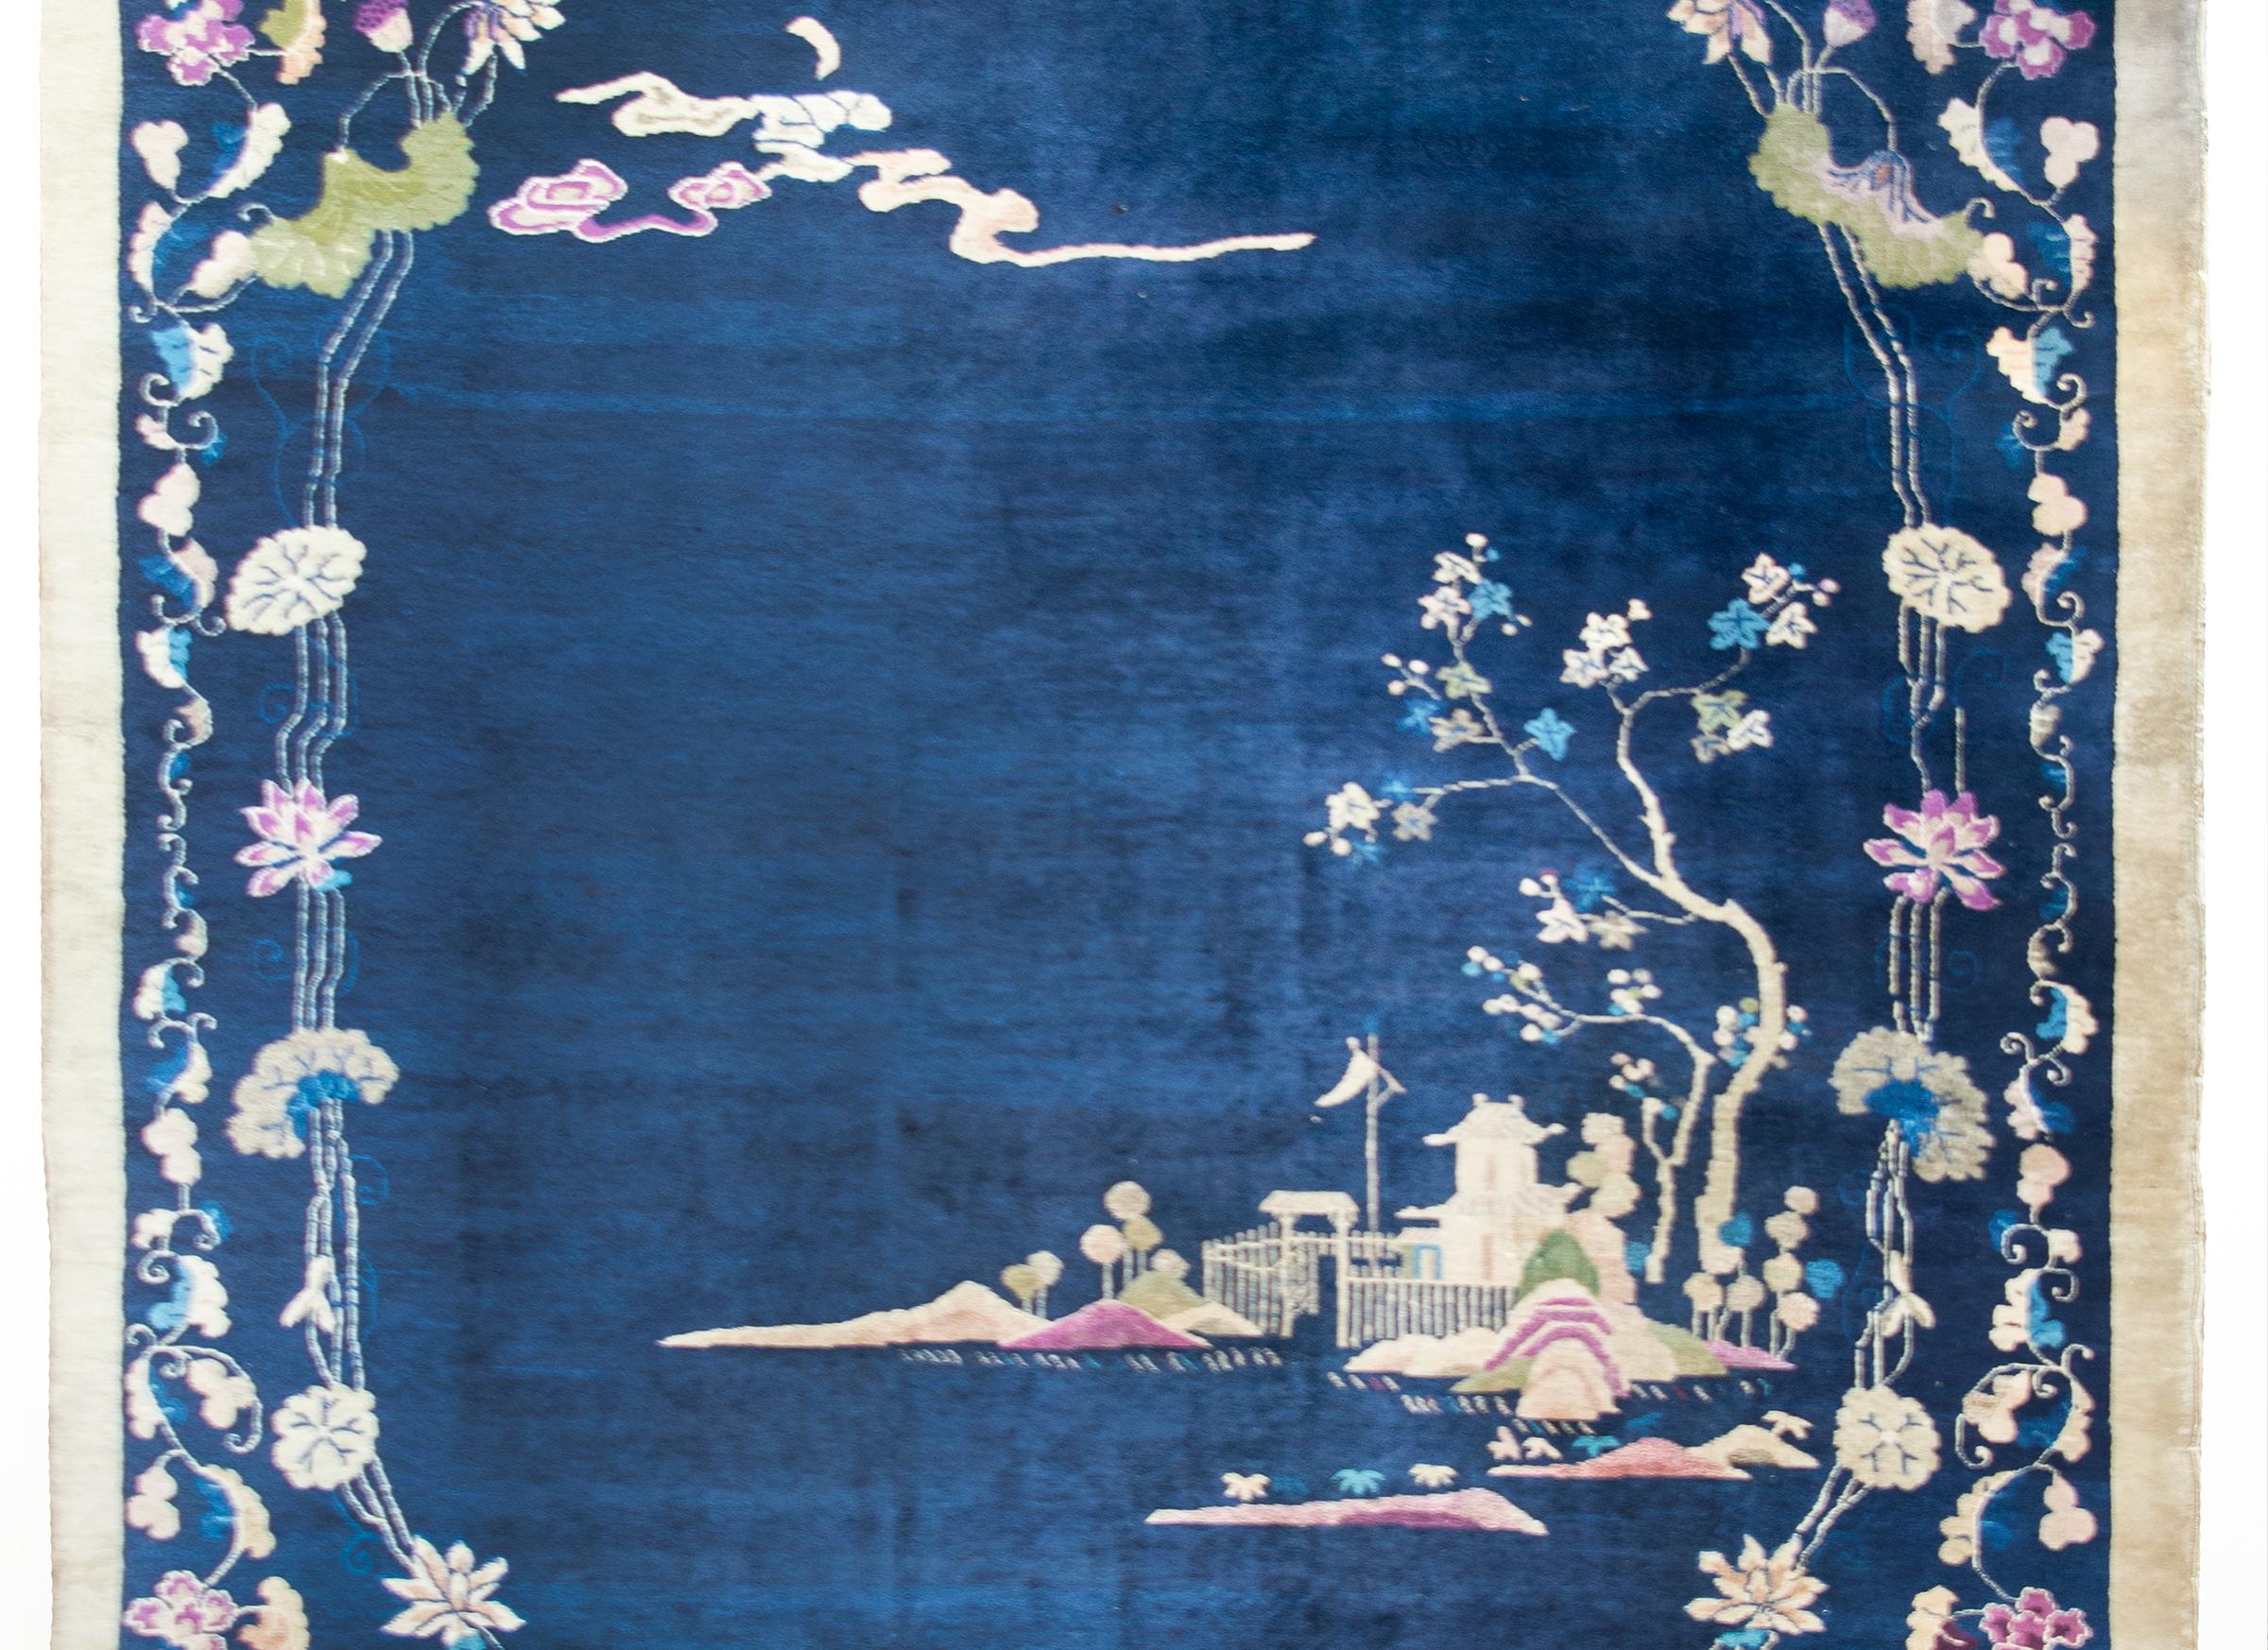 A wonderful early 20th century Chinese Art Deco rug with a dark indigo field surrounded by a lacy floral and scrolling vine border with an oval cutout framing a garden landscape with pavilion and mountainous landscape, and all woven in beautiful